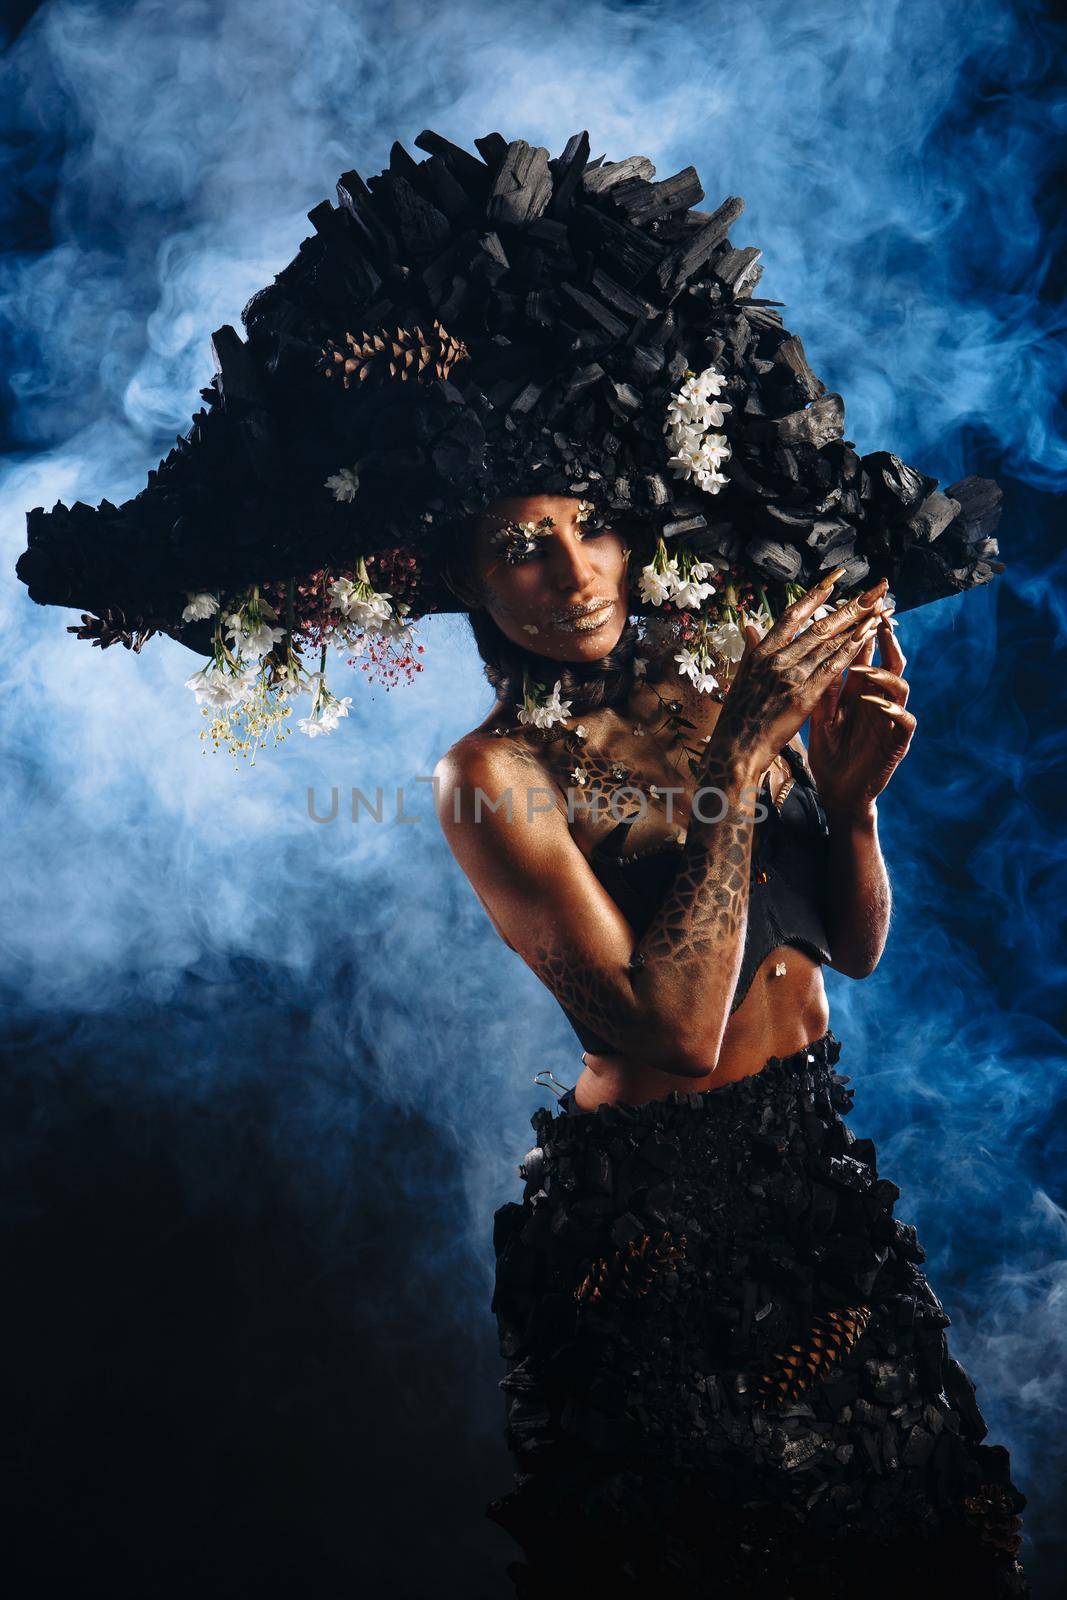 Portrait of a model in a headdress and dress made of coal. There is blue smoke behind the model by deandy